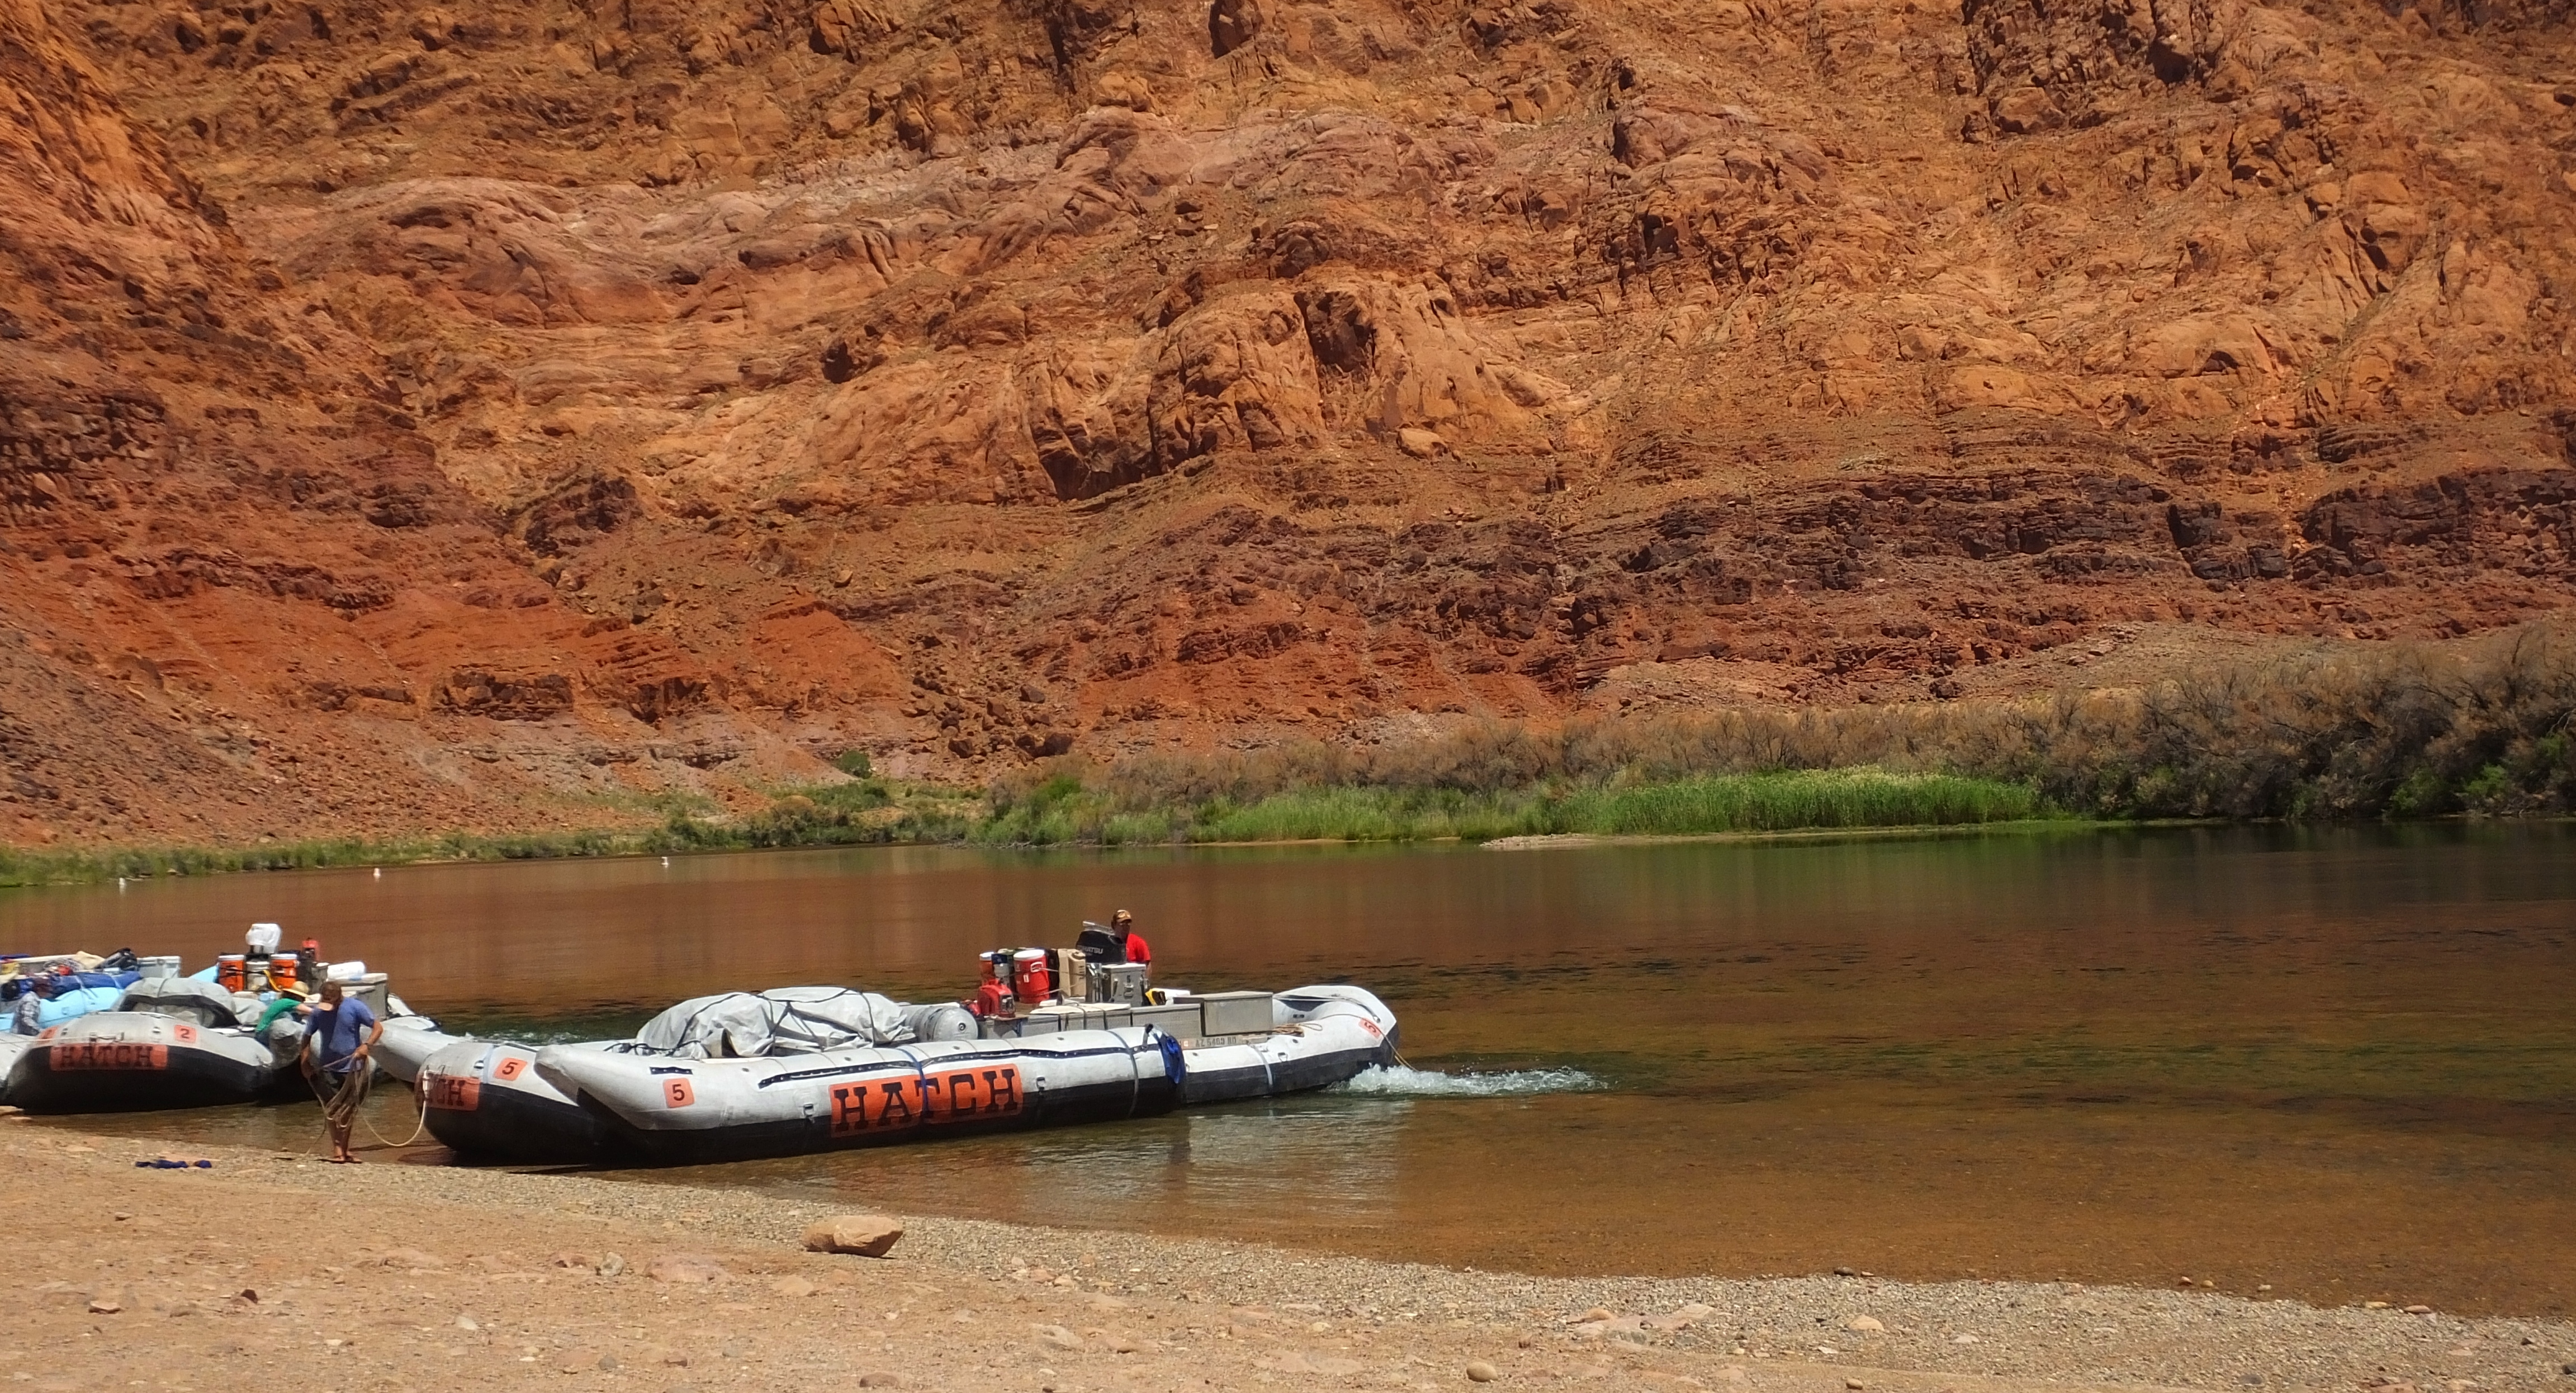 File:Fly Fisher On The Colorado River At Lee's Ferry, AZ.jpg